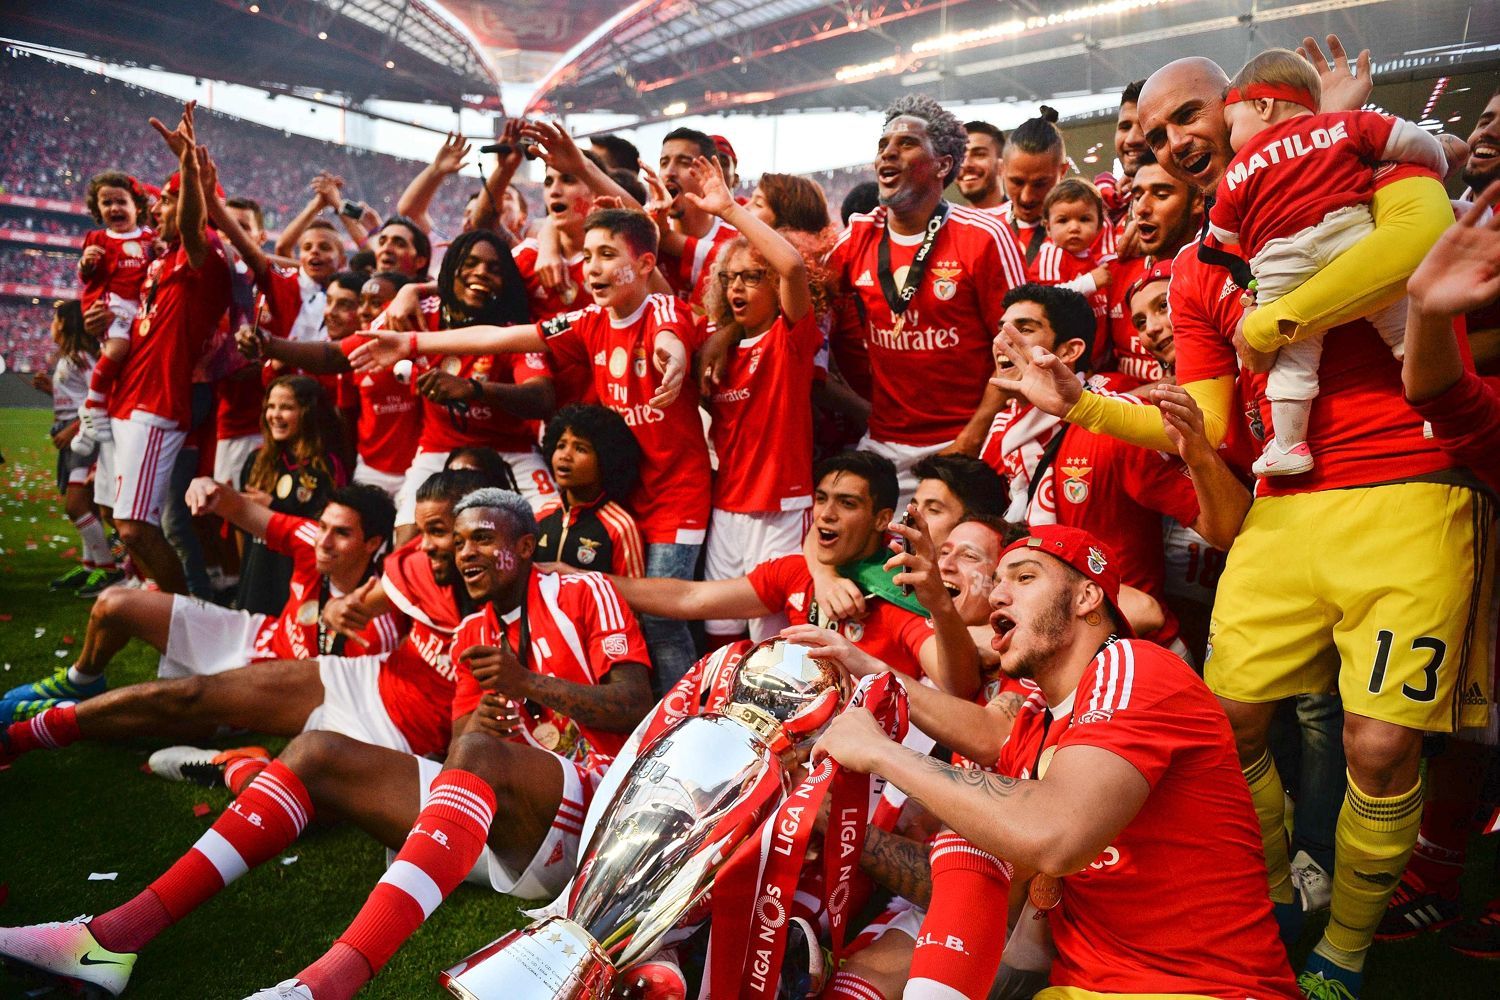 Chaves VS Benfica ( BETTING TIPS, Match Preview & Expert Analysis )